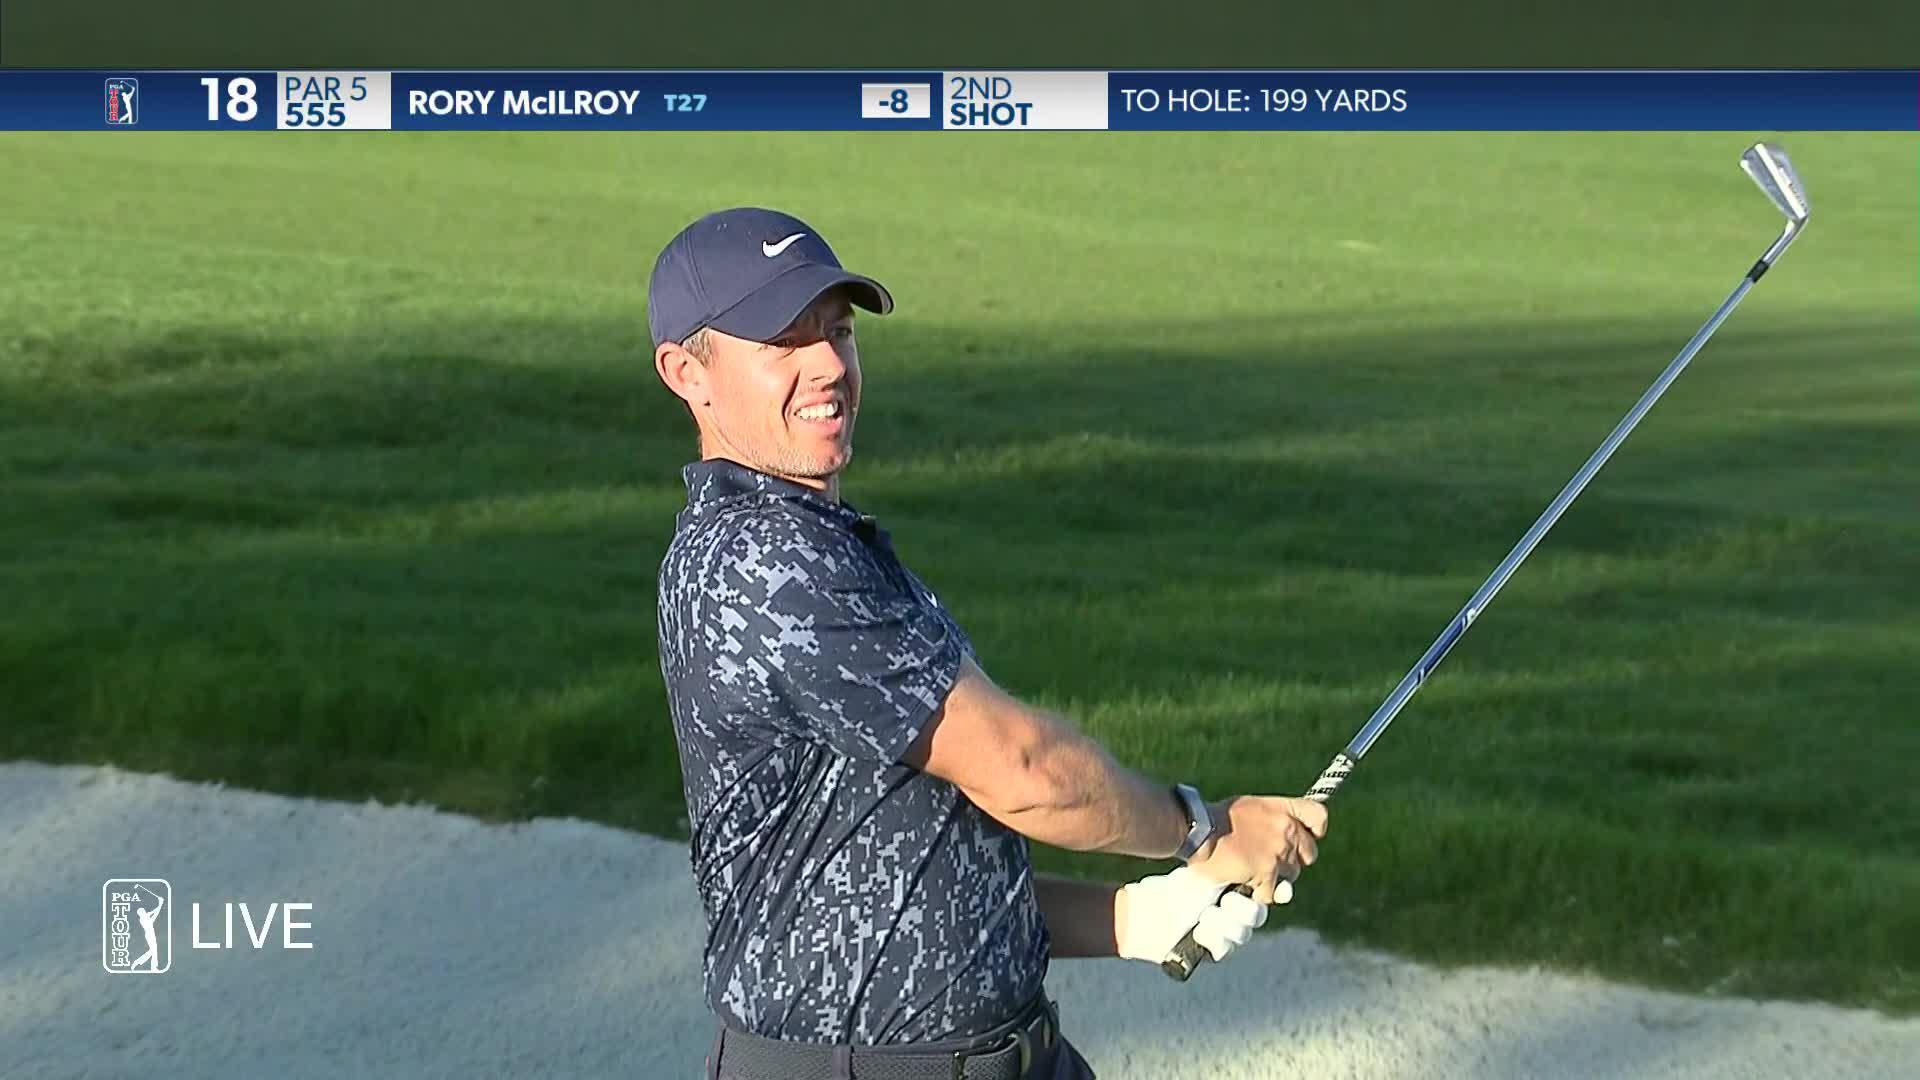 Rory McIlroys approach from a fairway bunker yields birdie at THE CJ CUP